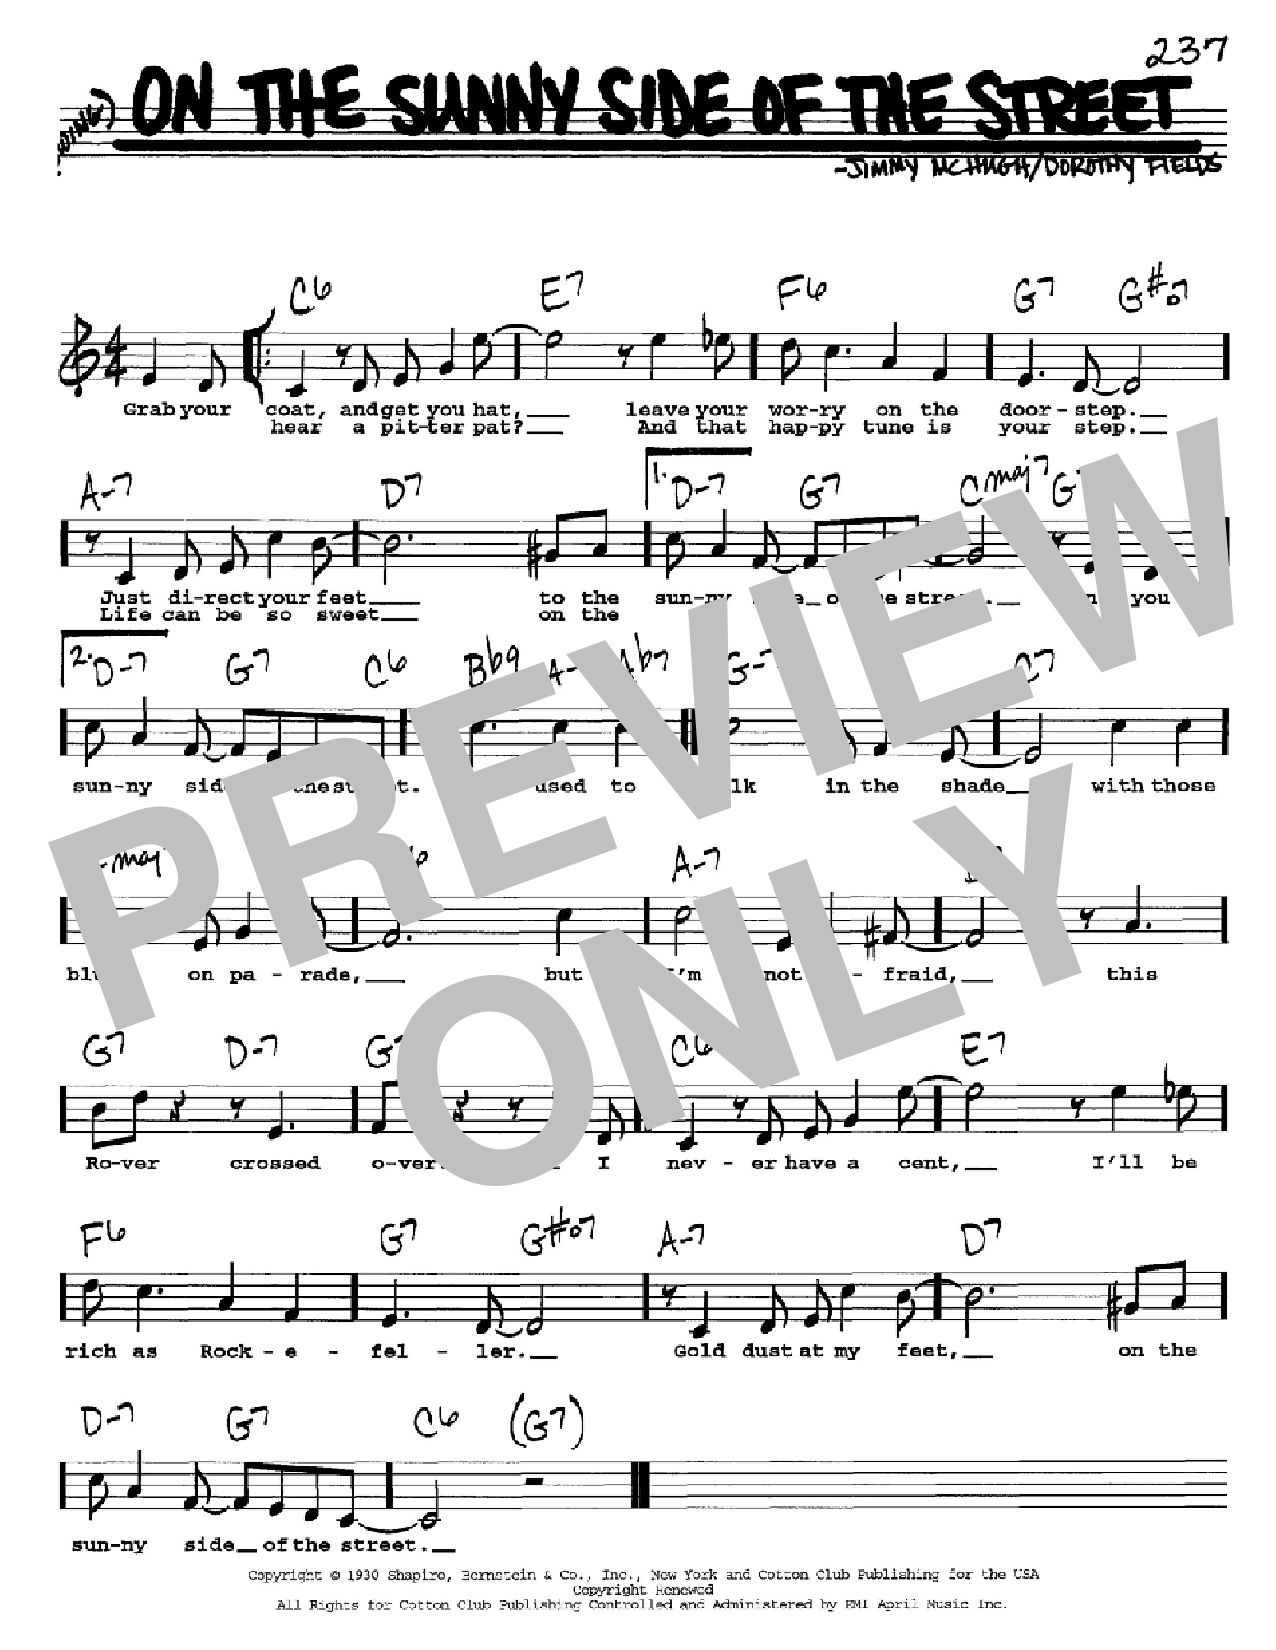 Download Dorothy Fields On The Sunny Side Of The Street Sheet Music